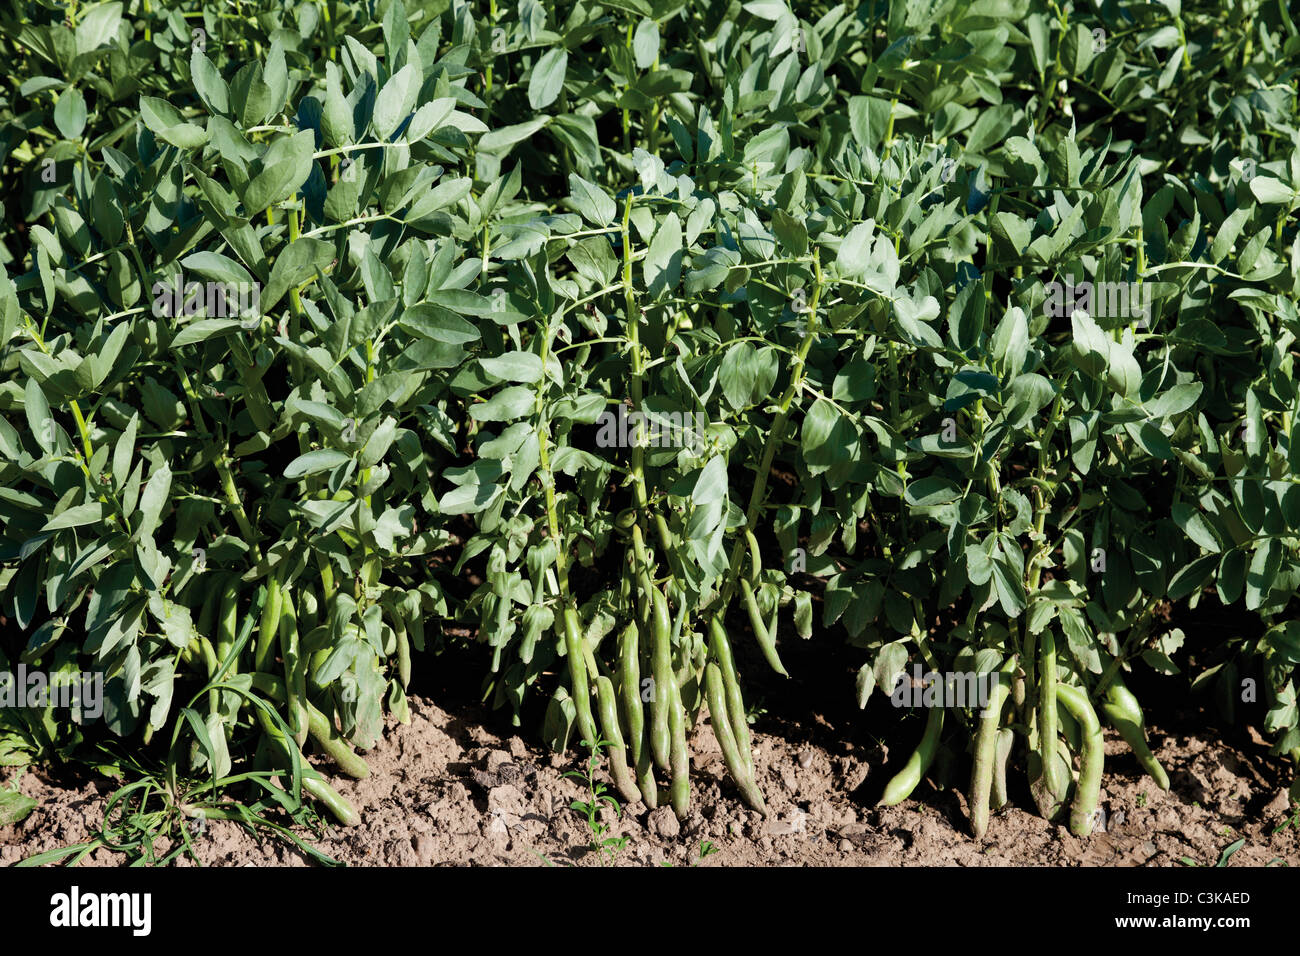 Beans growing in field Stock Photo